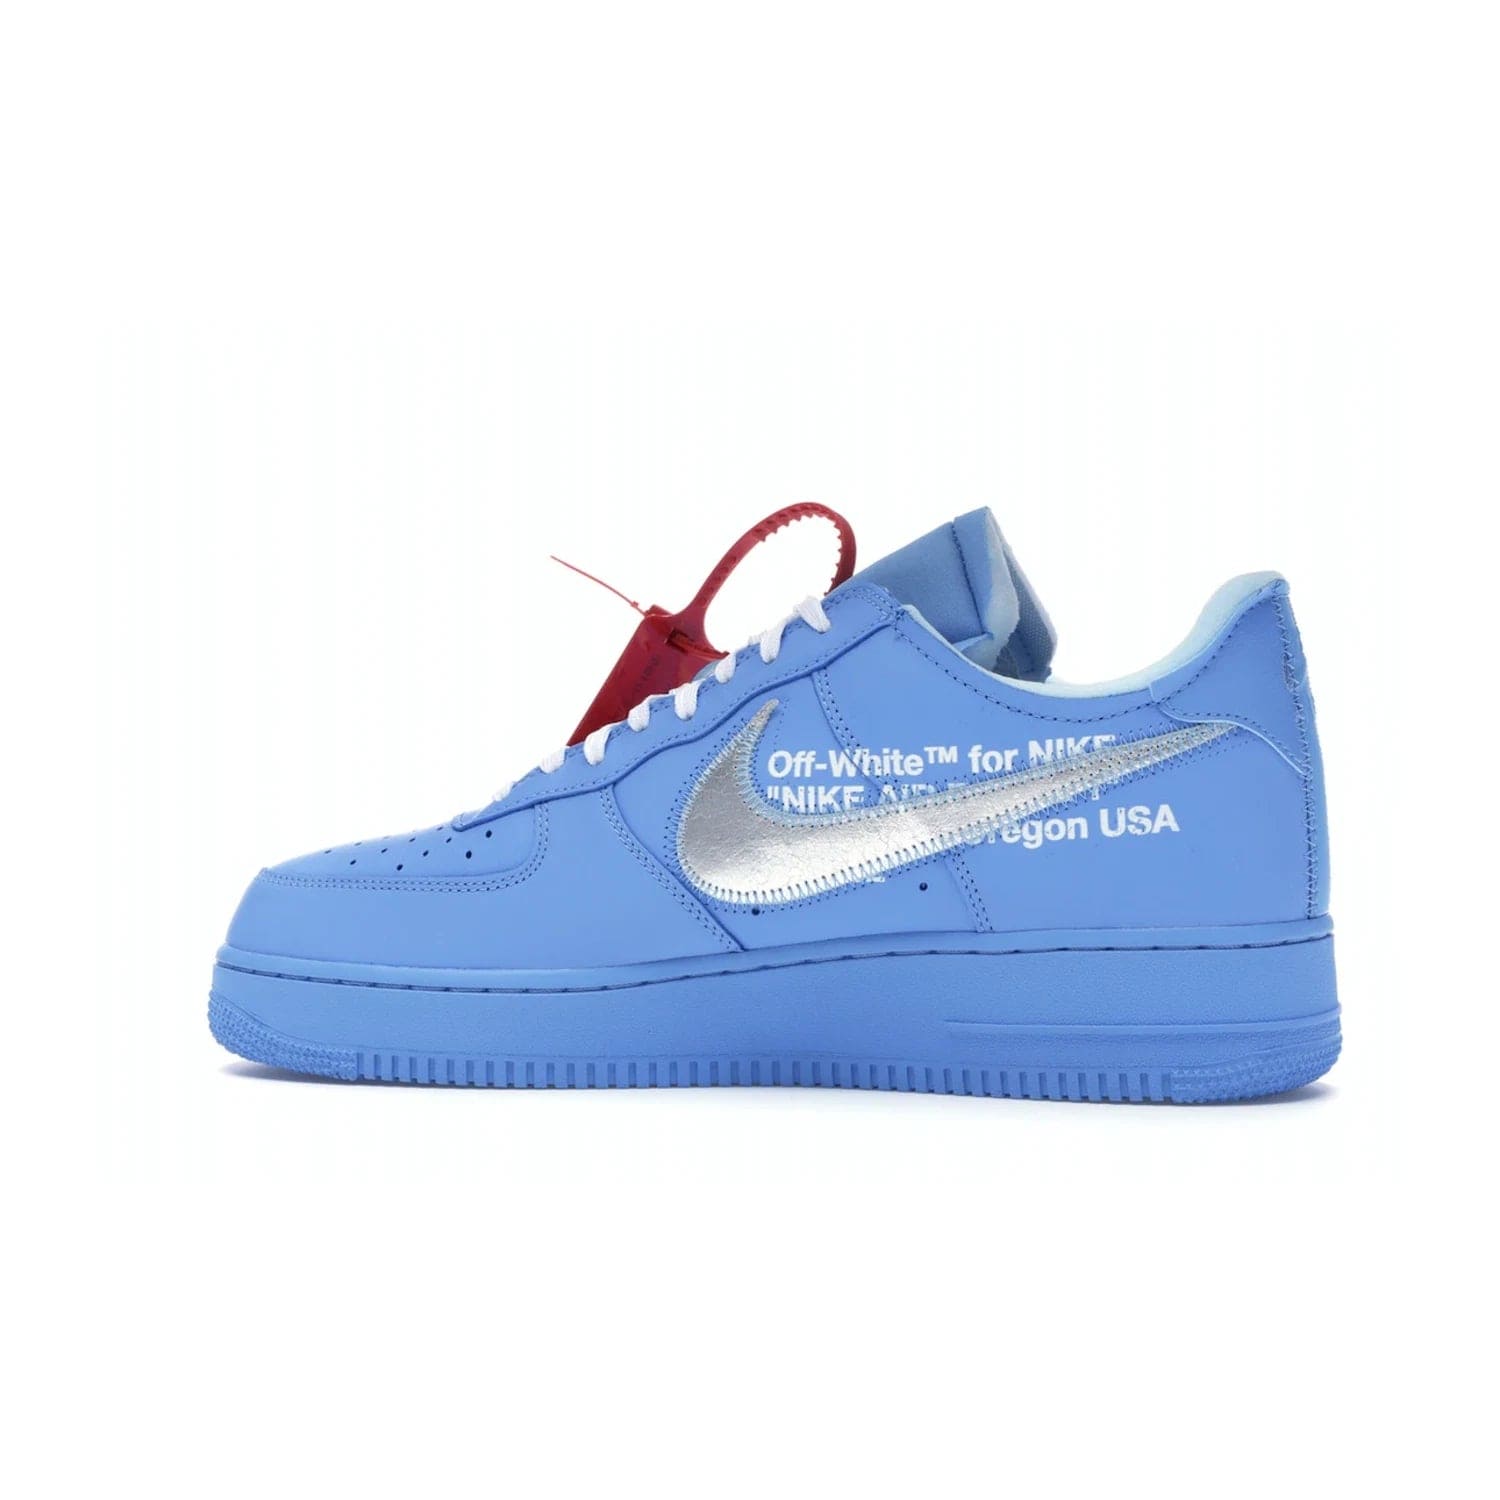 Nike Air Force 1 Low Off-White MCA University Blue - Image 21 - Only at www.BallersClubKickz.com - Virgil Abloh's Air Force 1 Low Off-White MCA University Blue: Features University Blue leather and midsole, reflective silver Nike Swoosh, red zip tie, white laces, and iconic Off-White™ branding. A must-have for any Virgil Abloh enthusiast.